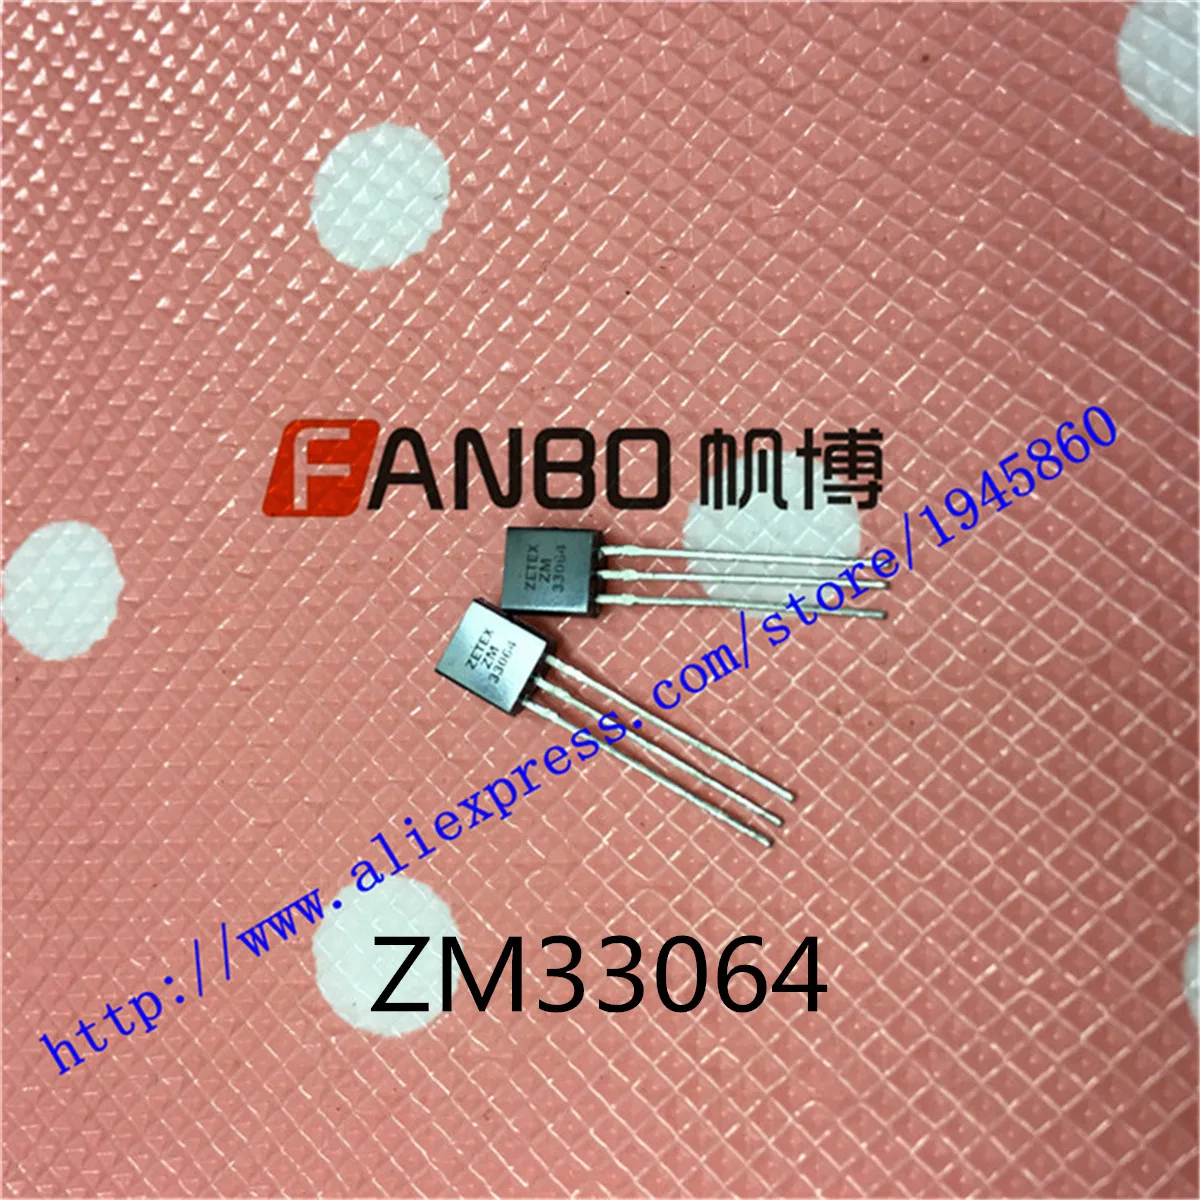 5PCS ZM33064 ZMR500 ZSM560 TO-92 New and Original In Stock